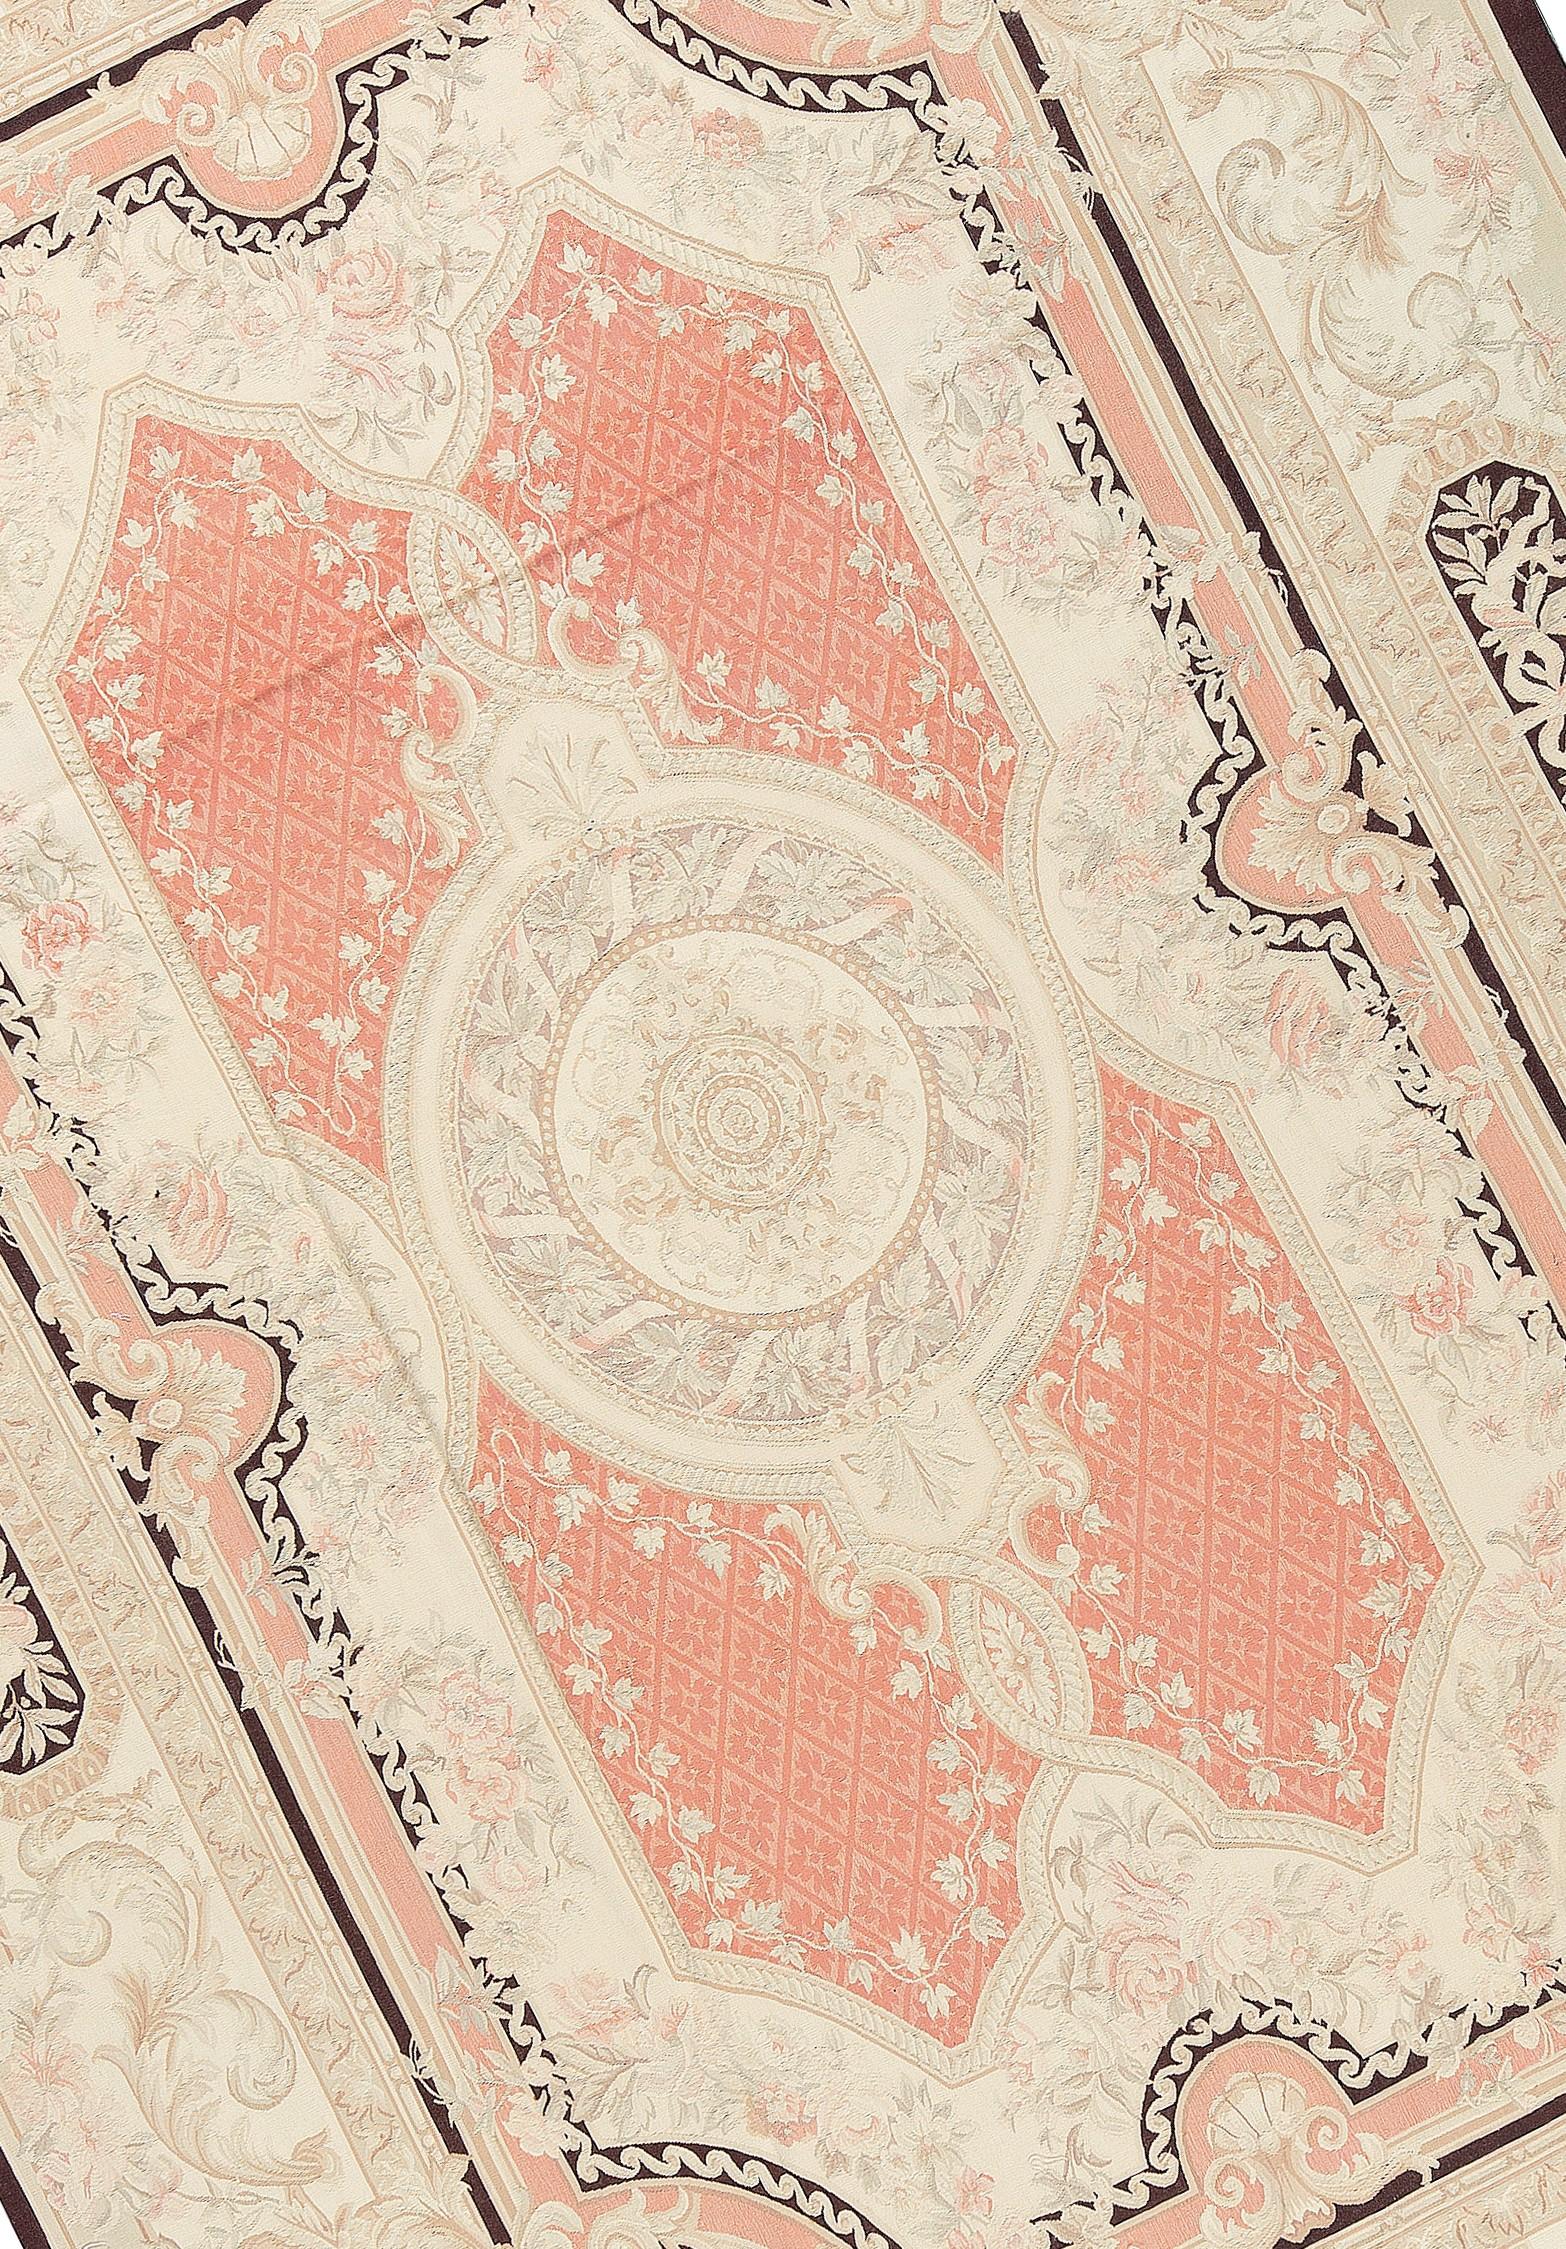 Handwoven recreation of the Classic French flat-weave Aubusson rugs that have been found in the finest homes and palaces since the late 17th century. Size: 9' 4'' x 13' 4''.